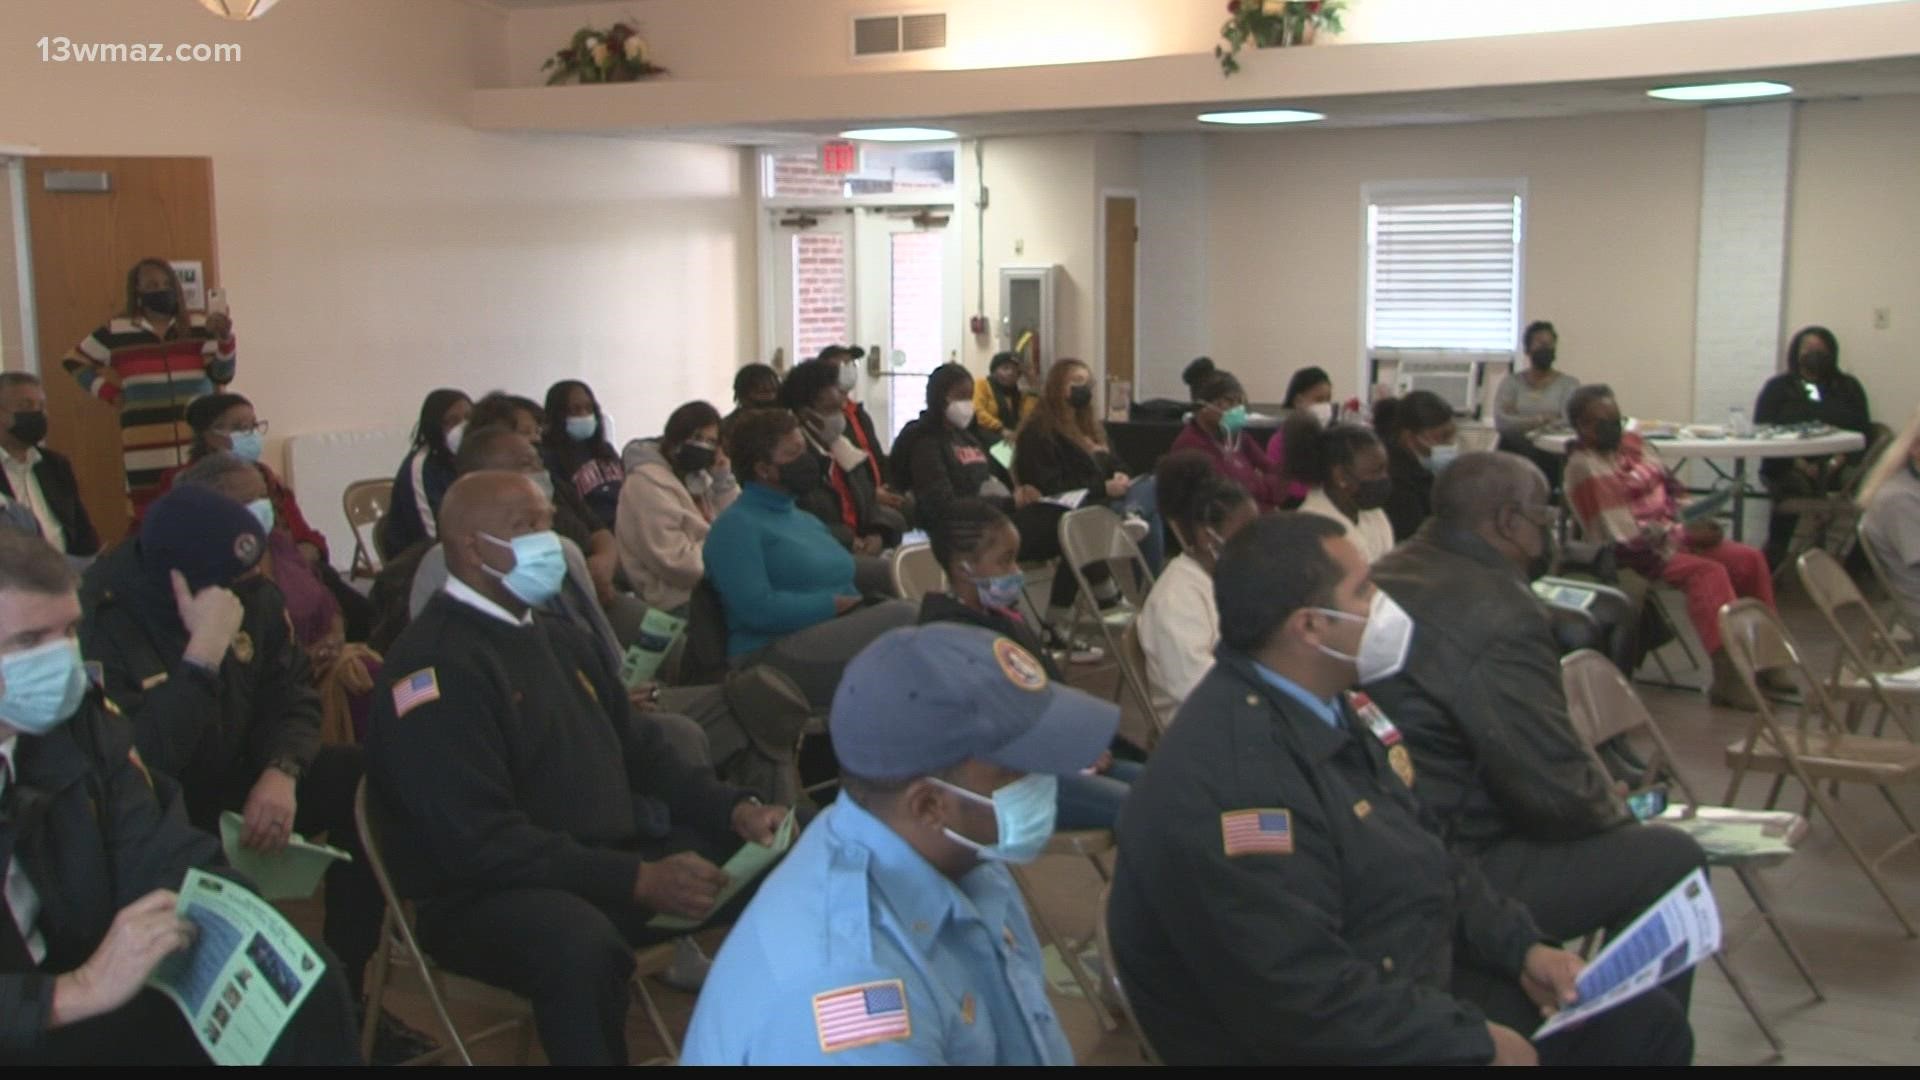 People in Macon had the chance to discuss how to approach interactions with law enforcement Saturday.